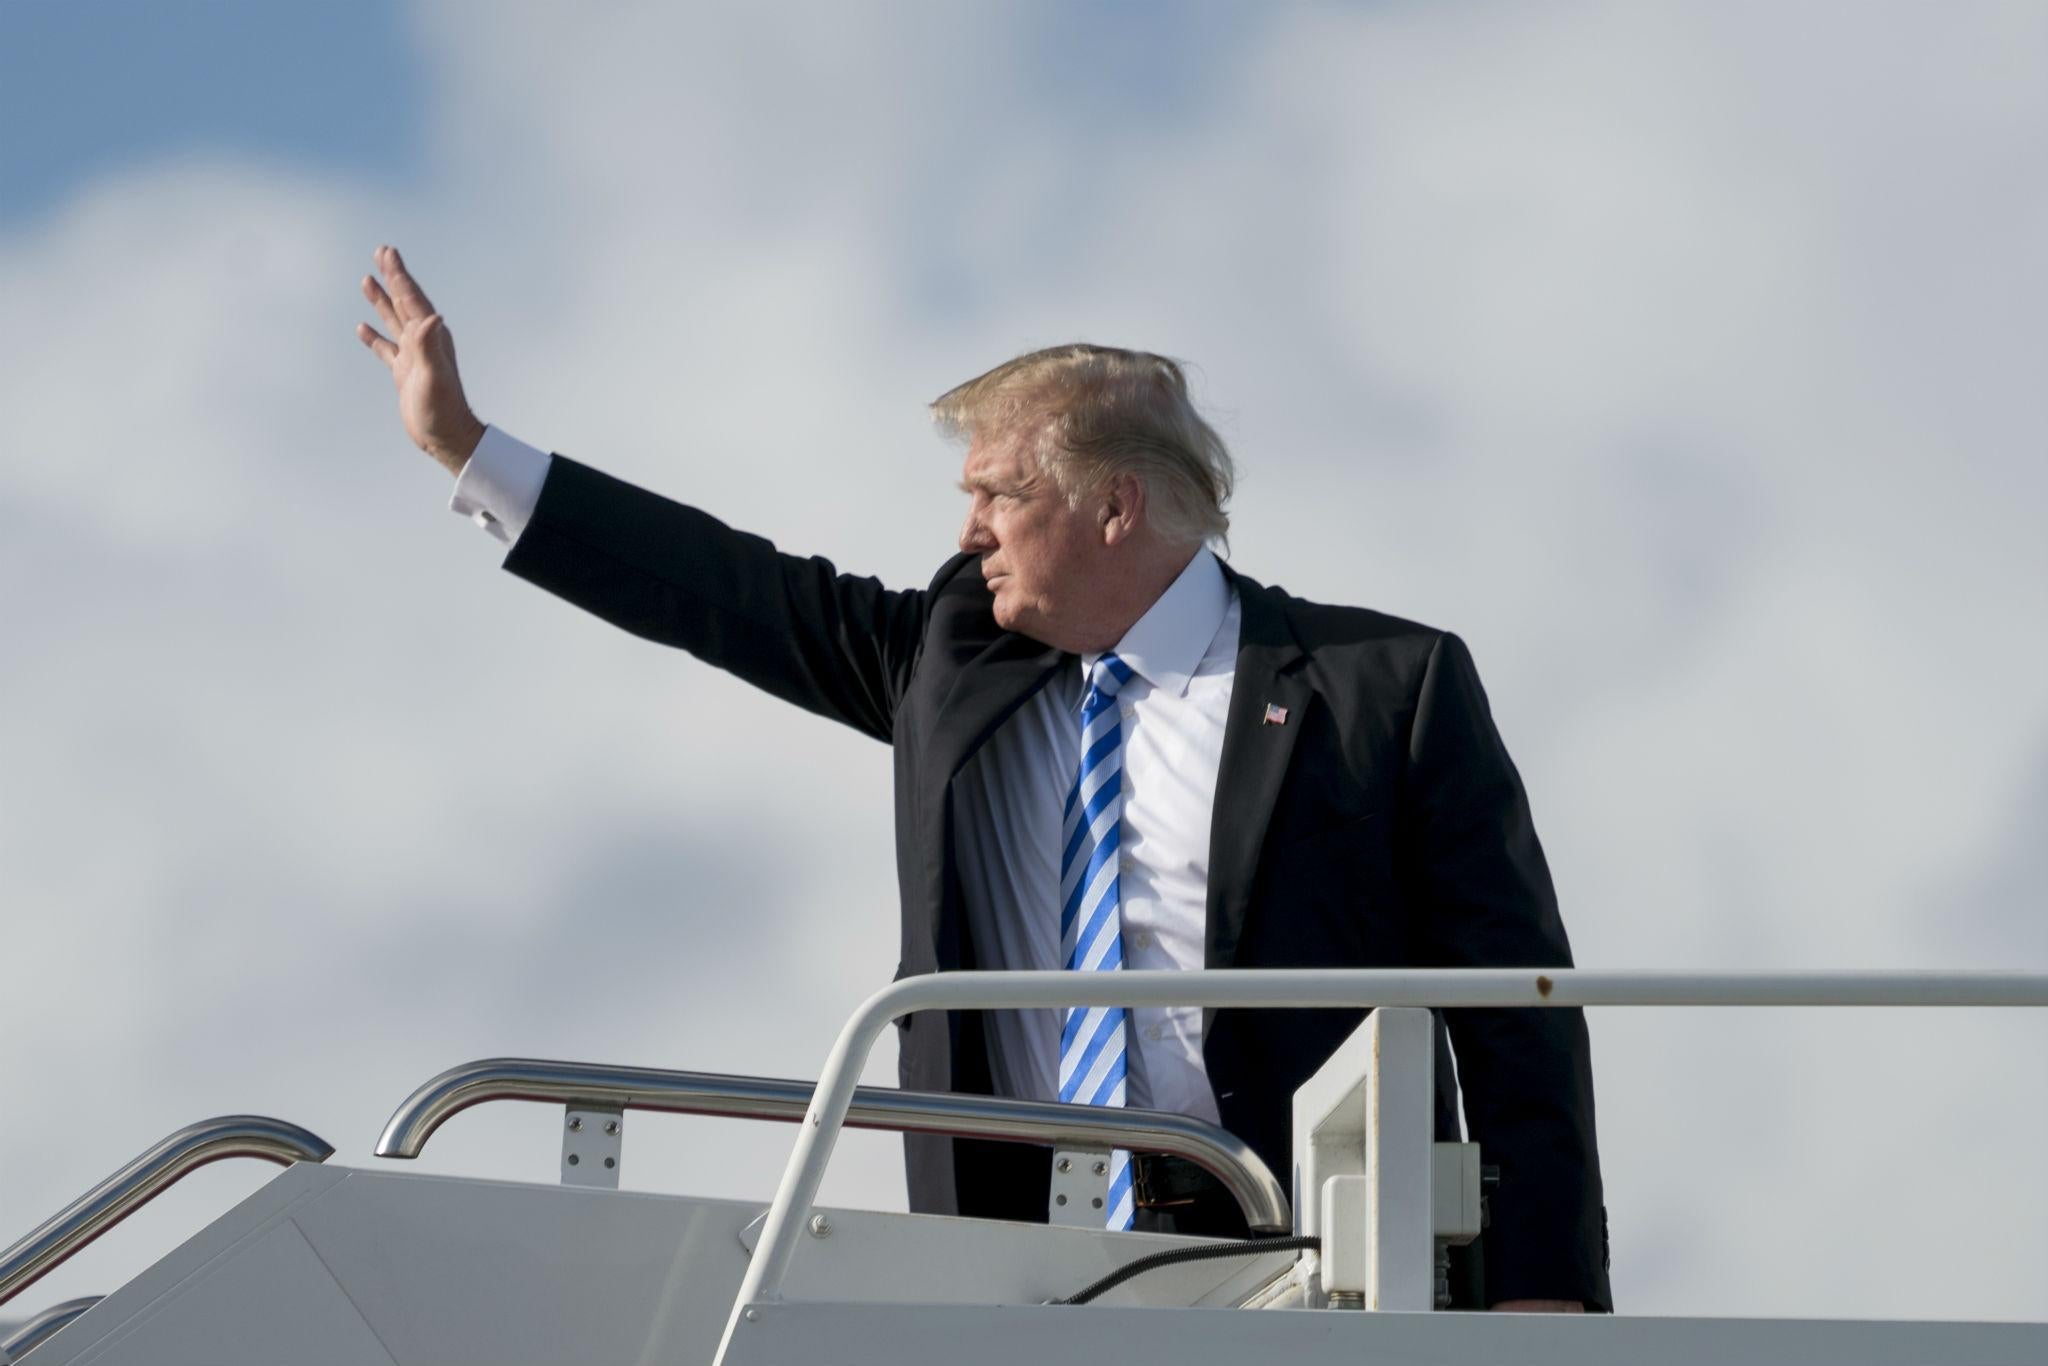 President Donald Trump returns to Washington after spending the weekend in Florida